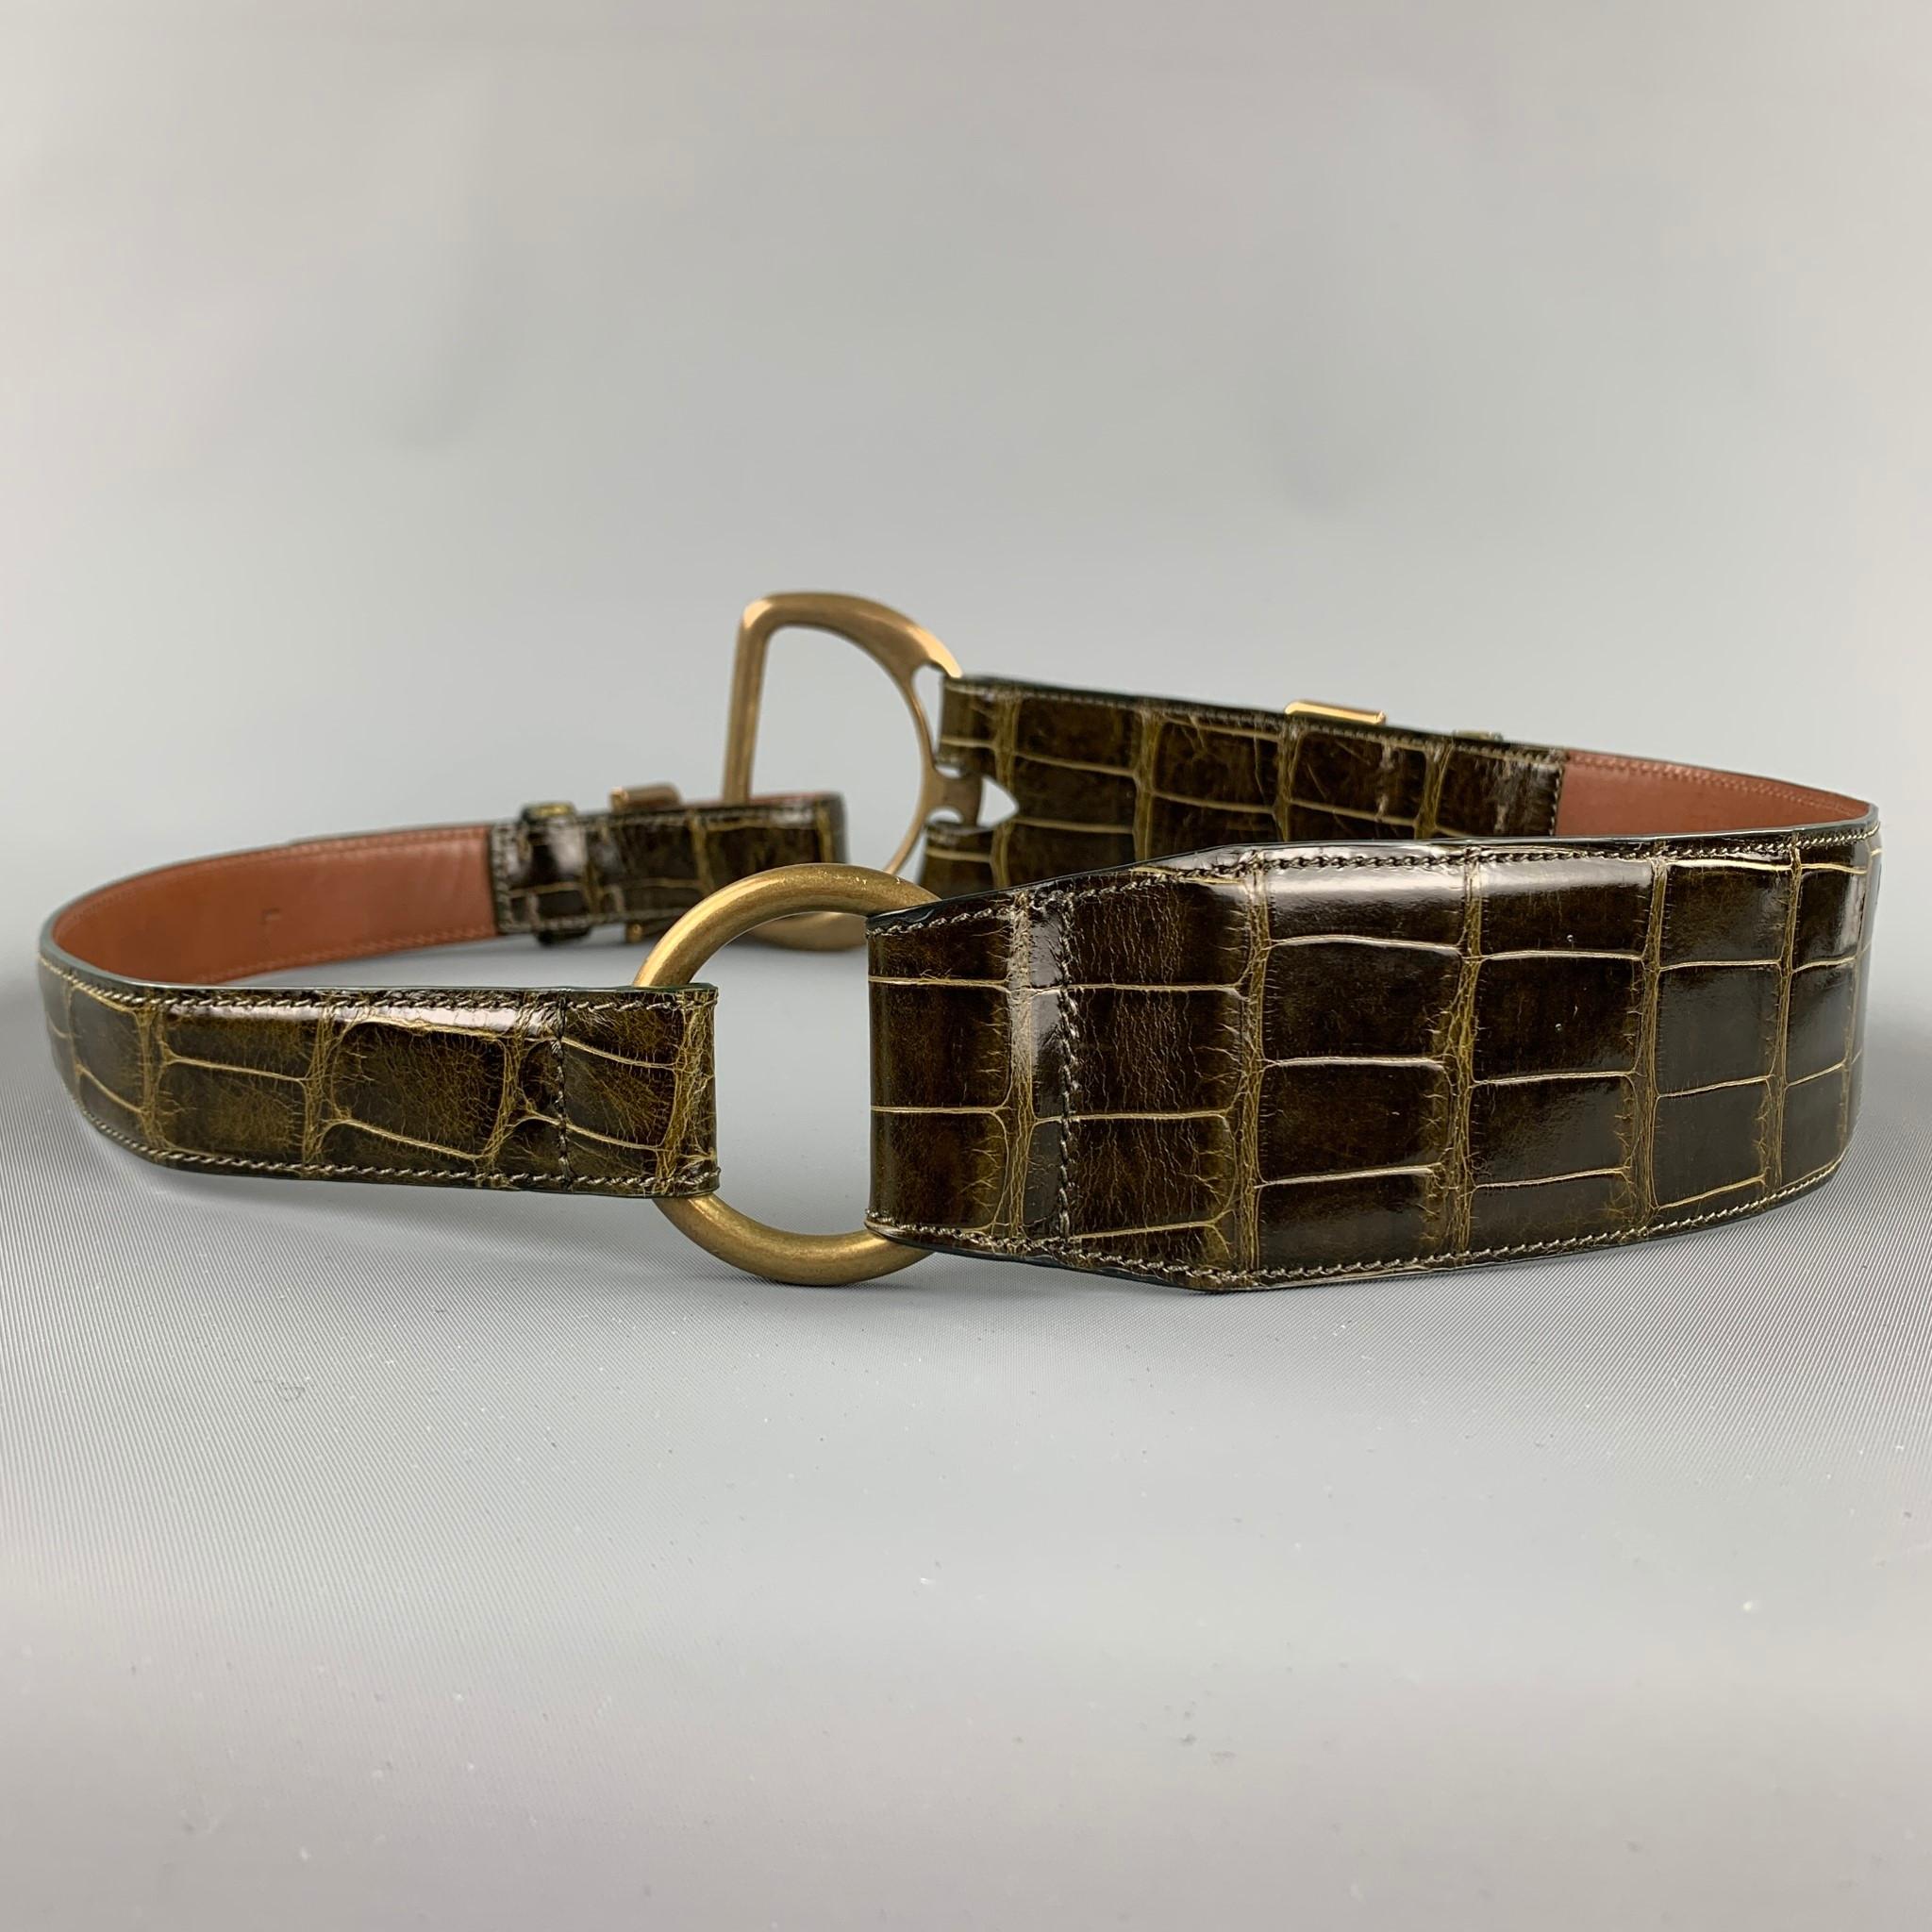 RALPH LAUREN Collection 2006 belt comes in a brown alligator featuring a brass hardware and a double buckle. Comes with dust bag. Made in Italy.

Very Good Pre-Owned Condition.
Marked: L
Original Retail Price: $1,475.00

Length: 43 in.
Width: 2